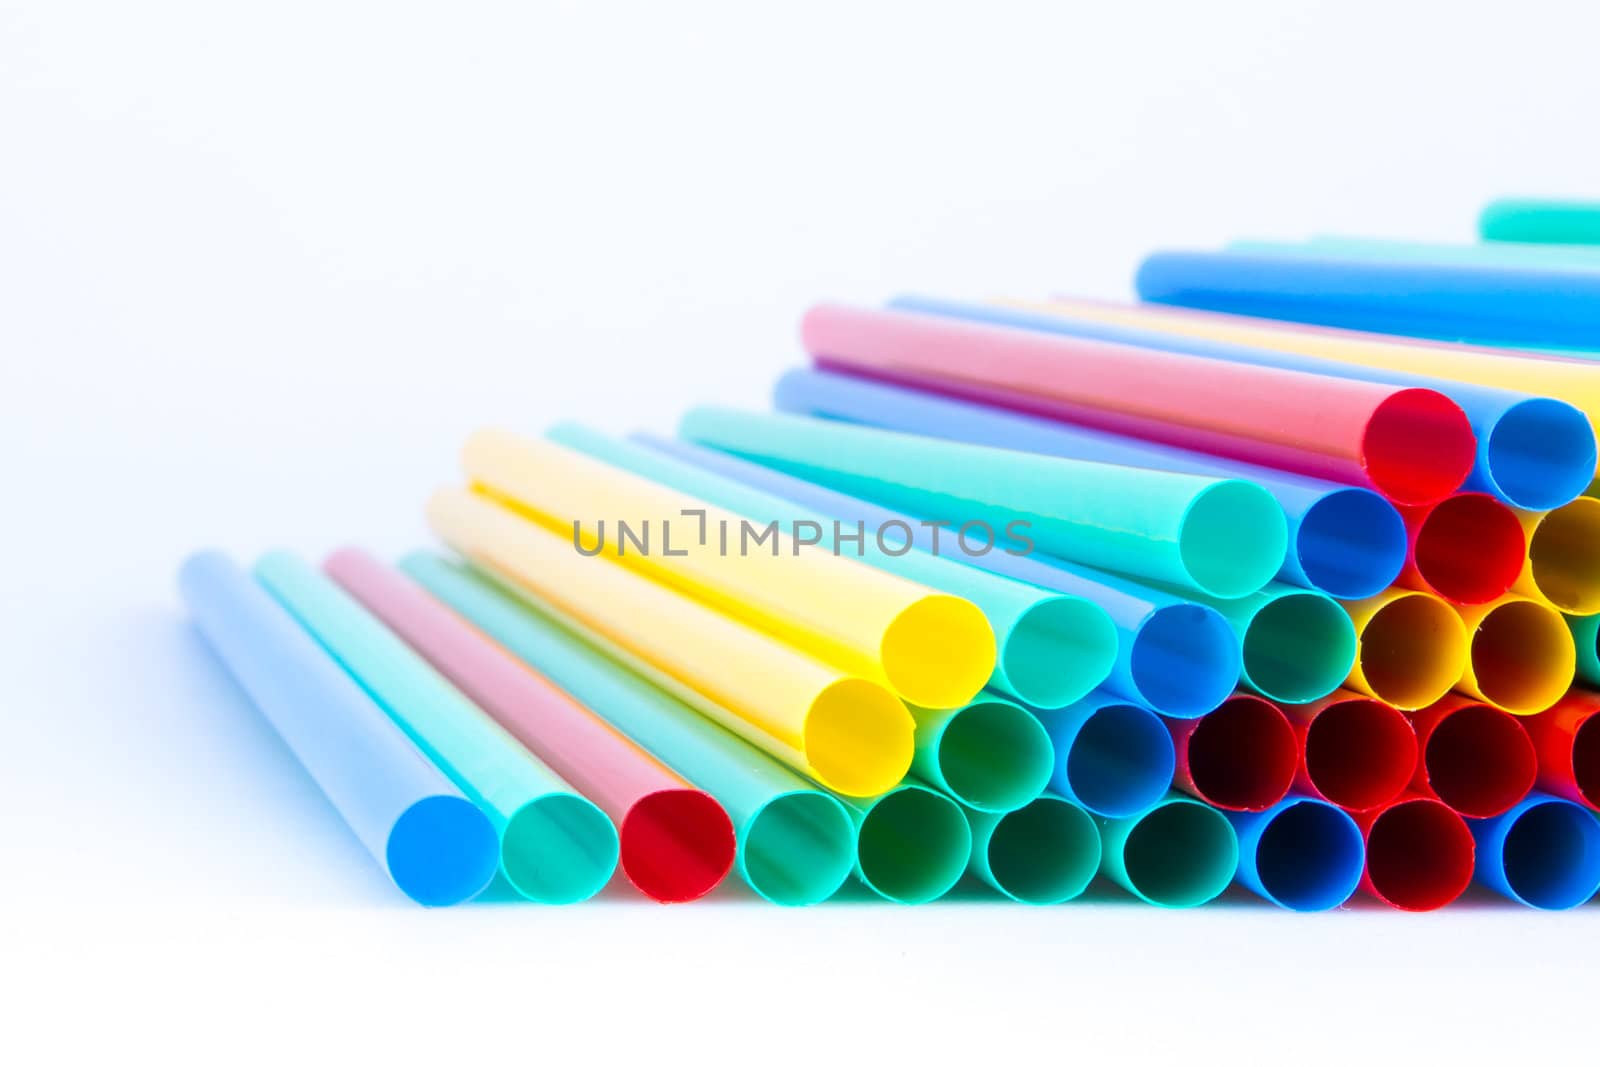 Different colors of straws by michaklootwijk